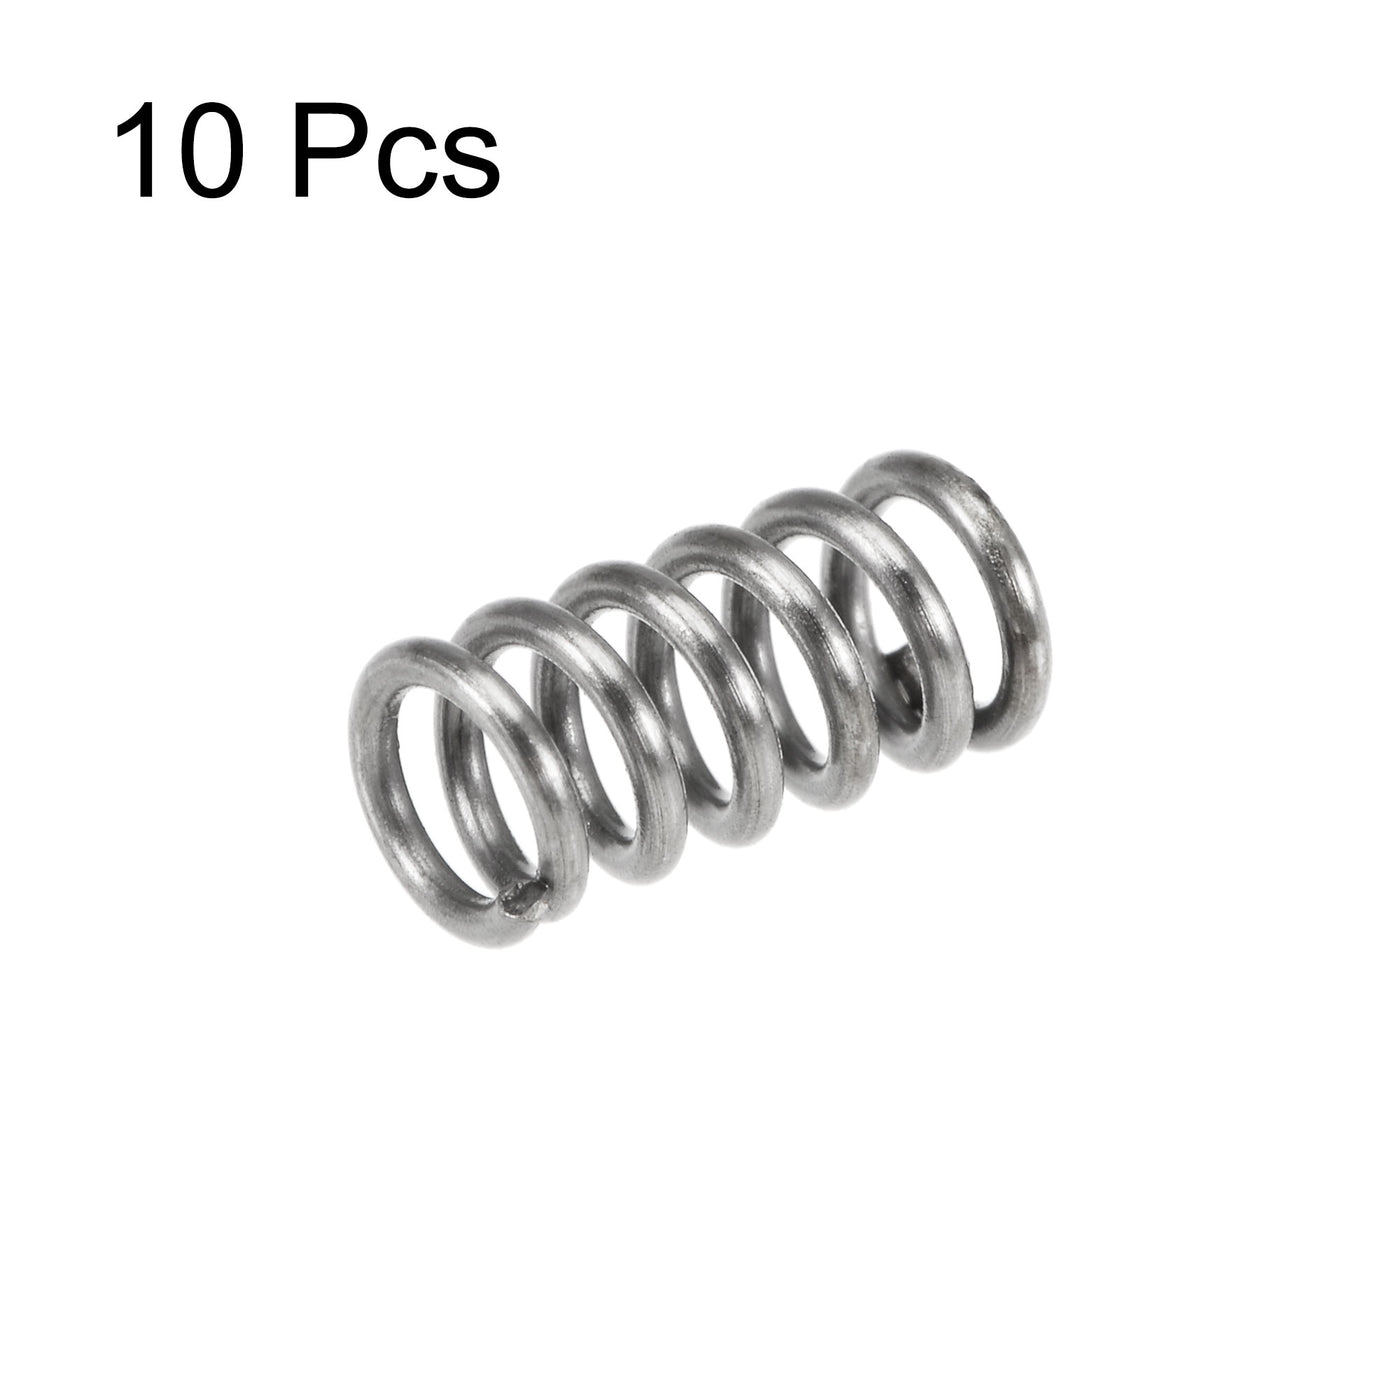 uxcell Uxcell Compressed Spring,5mmx0.8mmx10mm Free Length,35.3N Load Capacity,Gray,10pcs